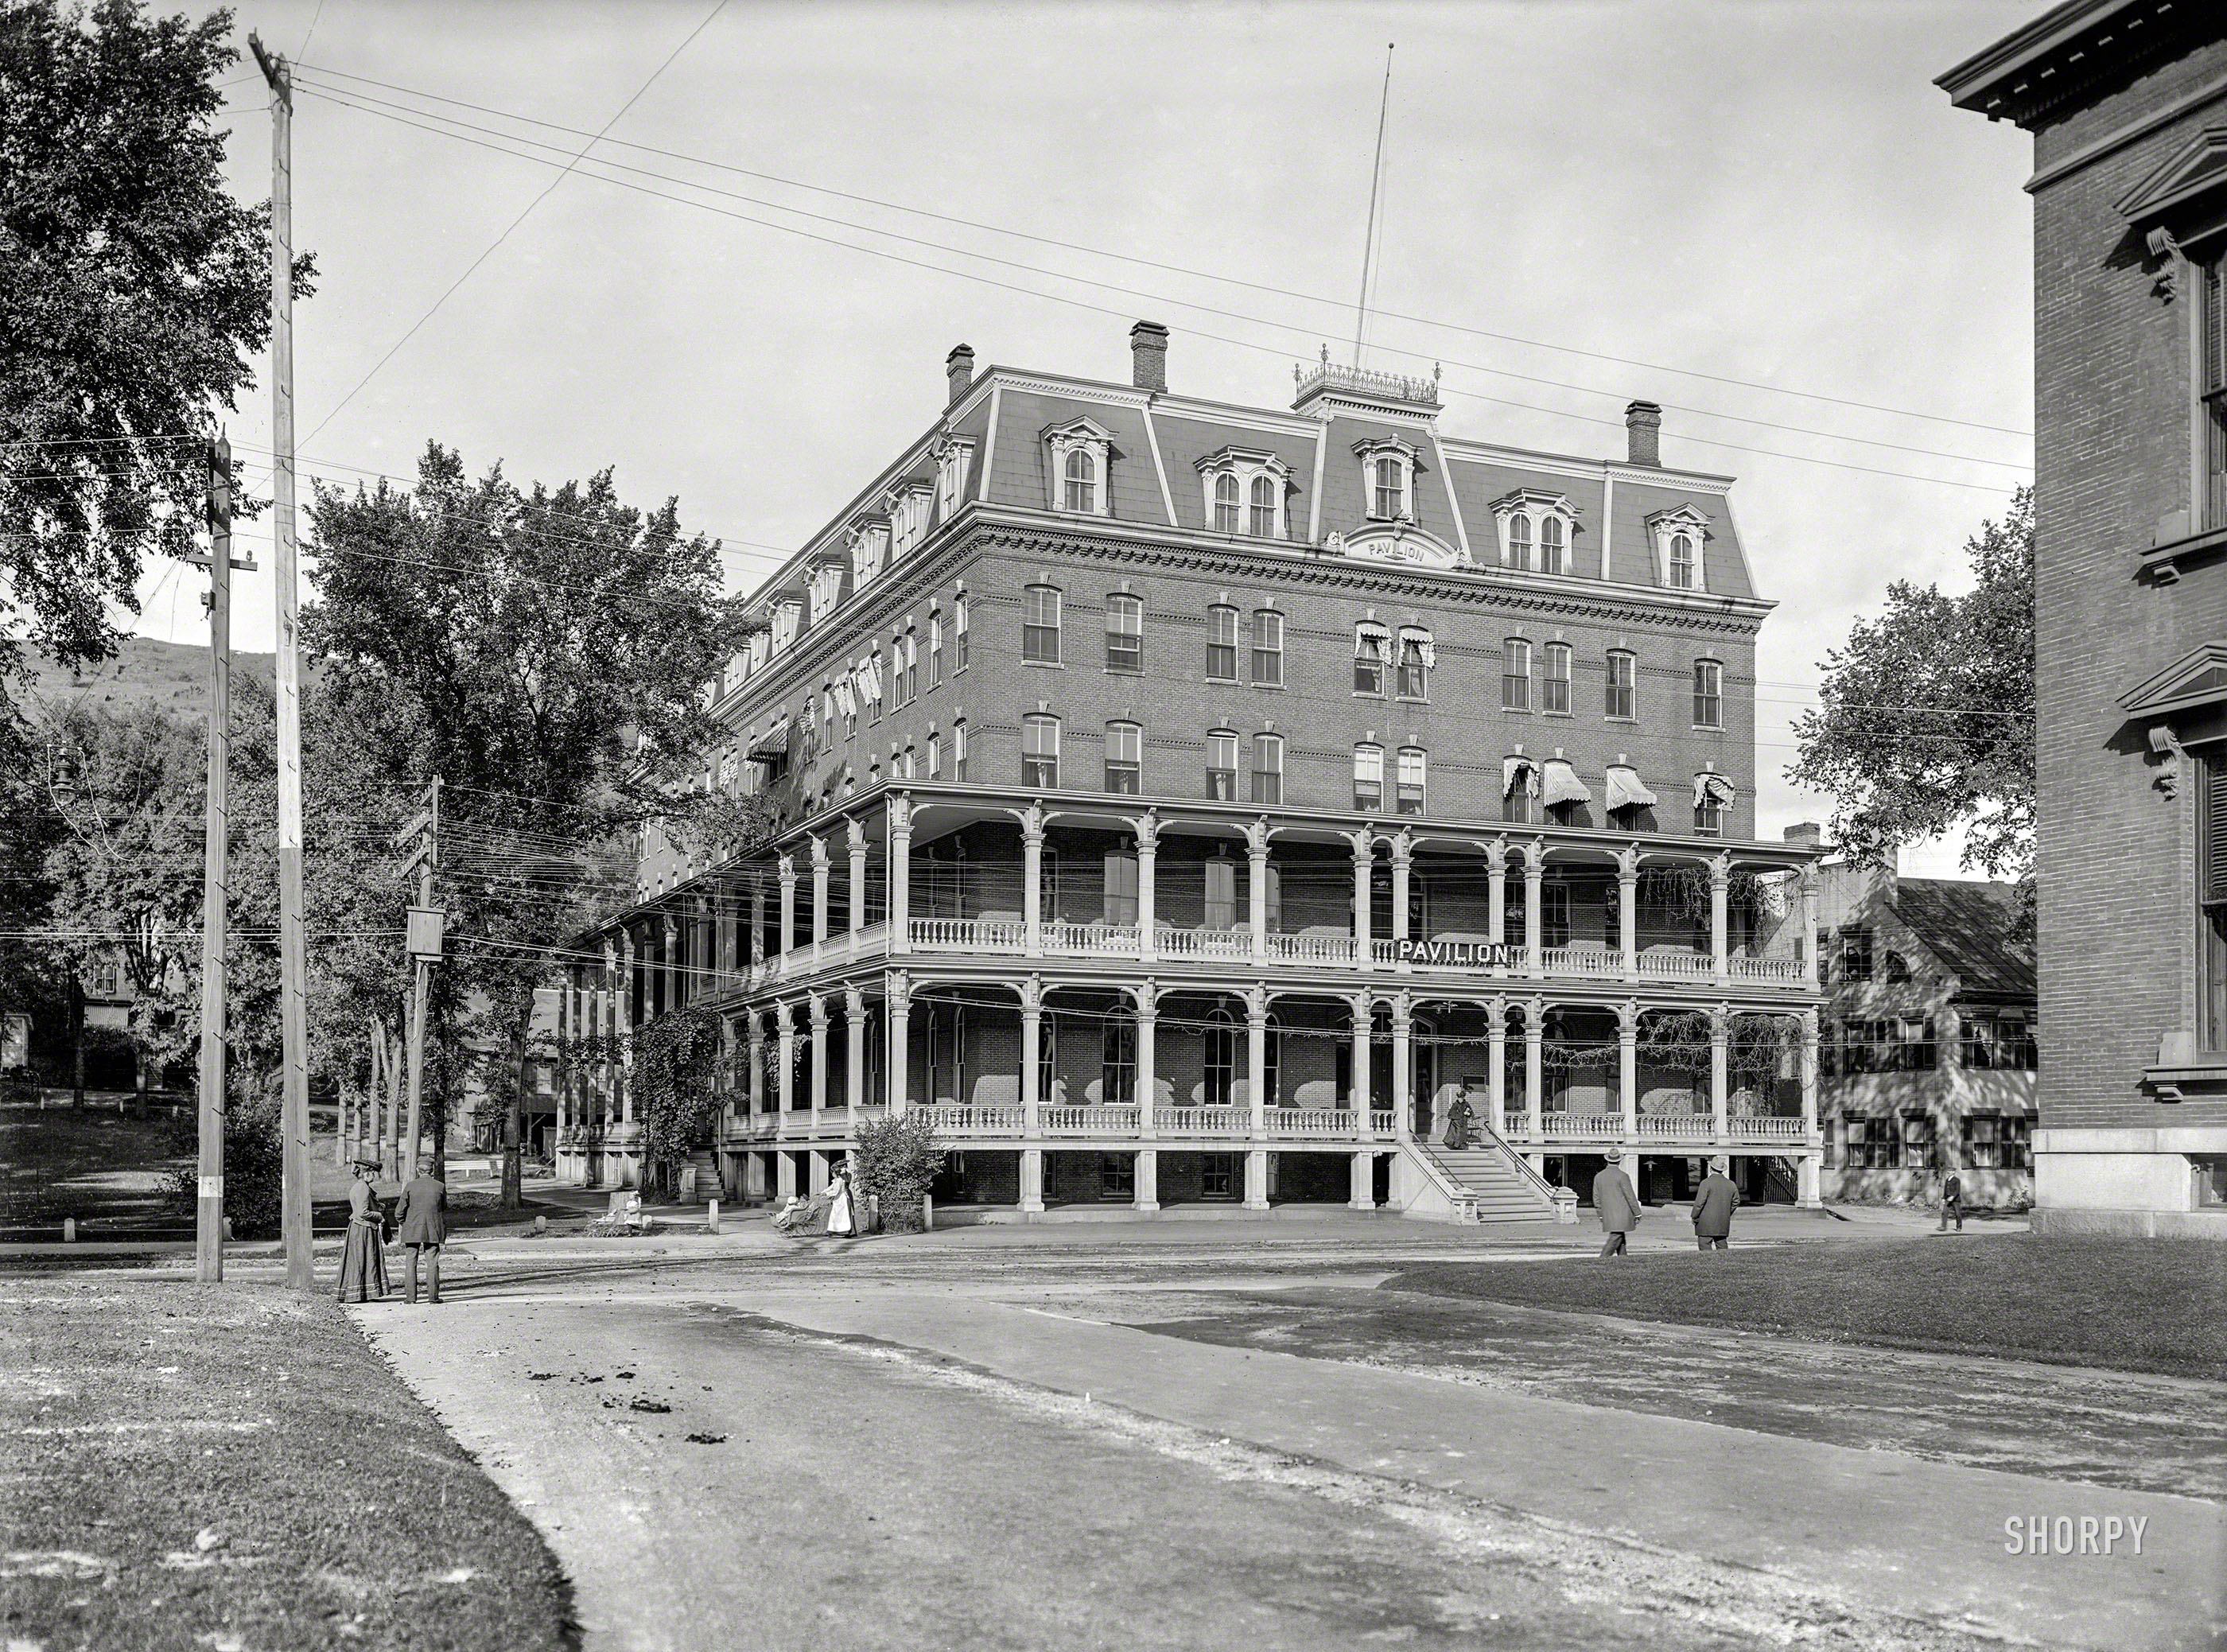 &nbsp; &nbsp; &nbsp; &nbsp; Principal workplace of the Governor of Vermont since 1971, the Second Empire style Pavilion is located at 109 State Street.
Montpelier, Vermont, circa 1904. "Pavilion Hotel." 8x10 inch dry plate glass negative, Detroit Photographic Company. View full size.